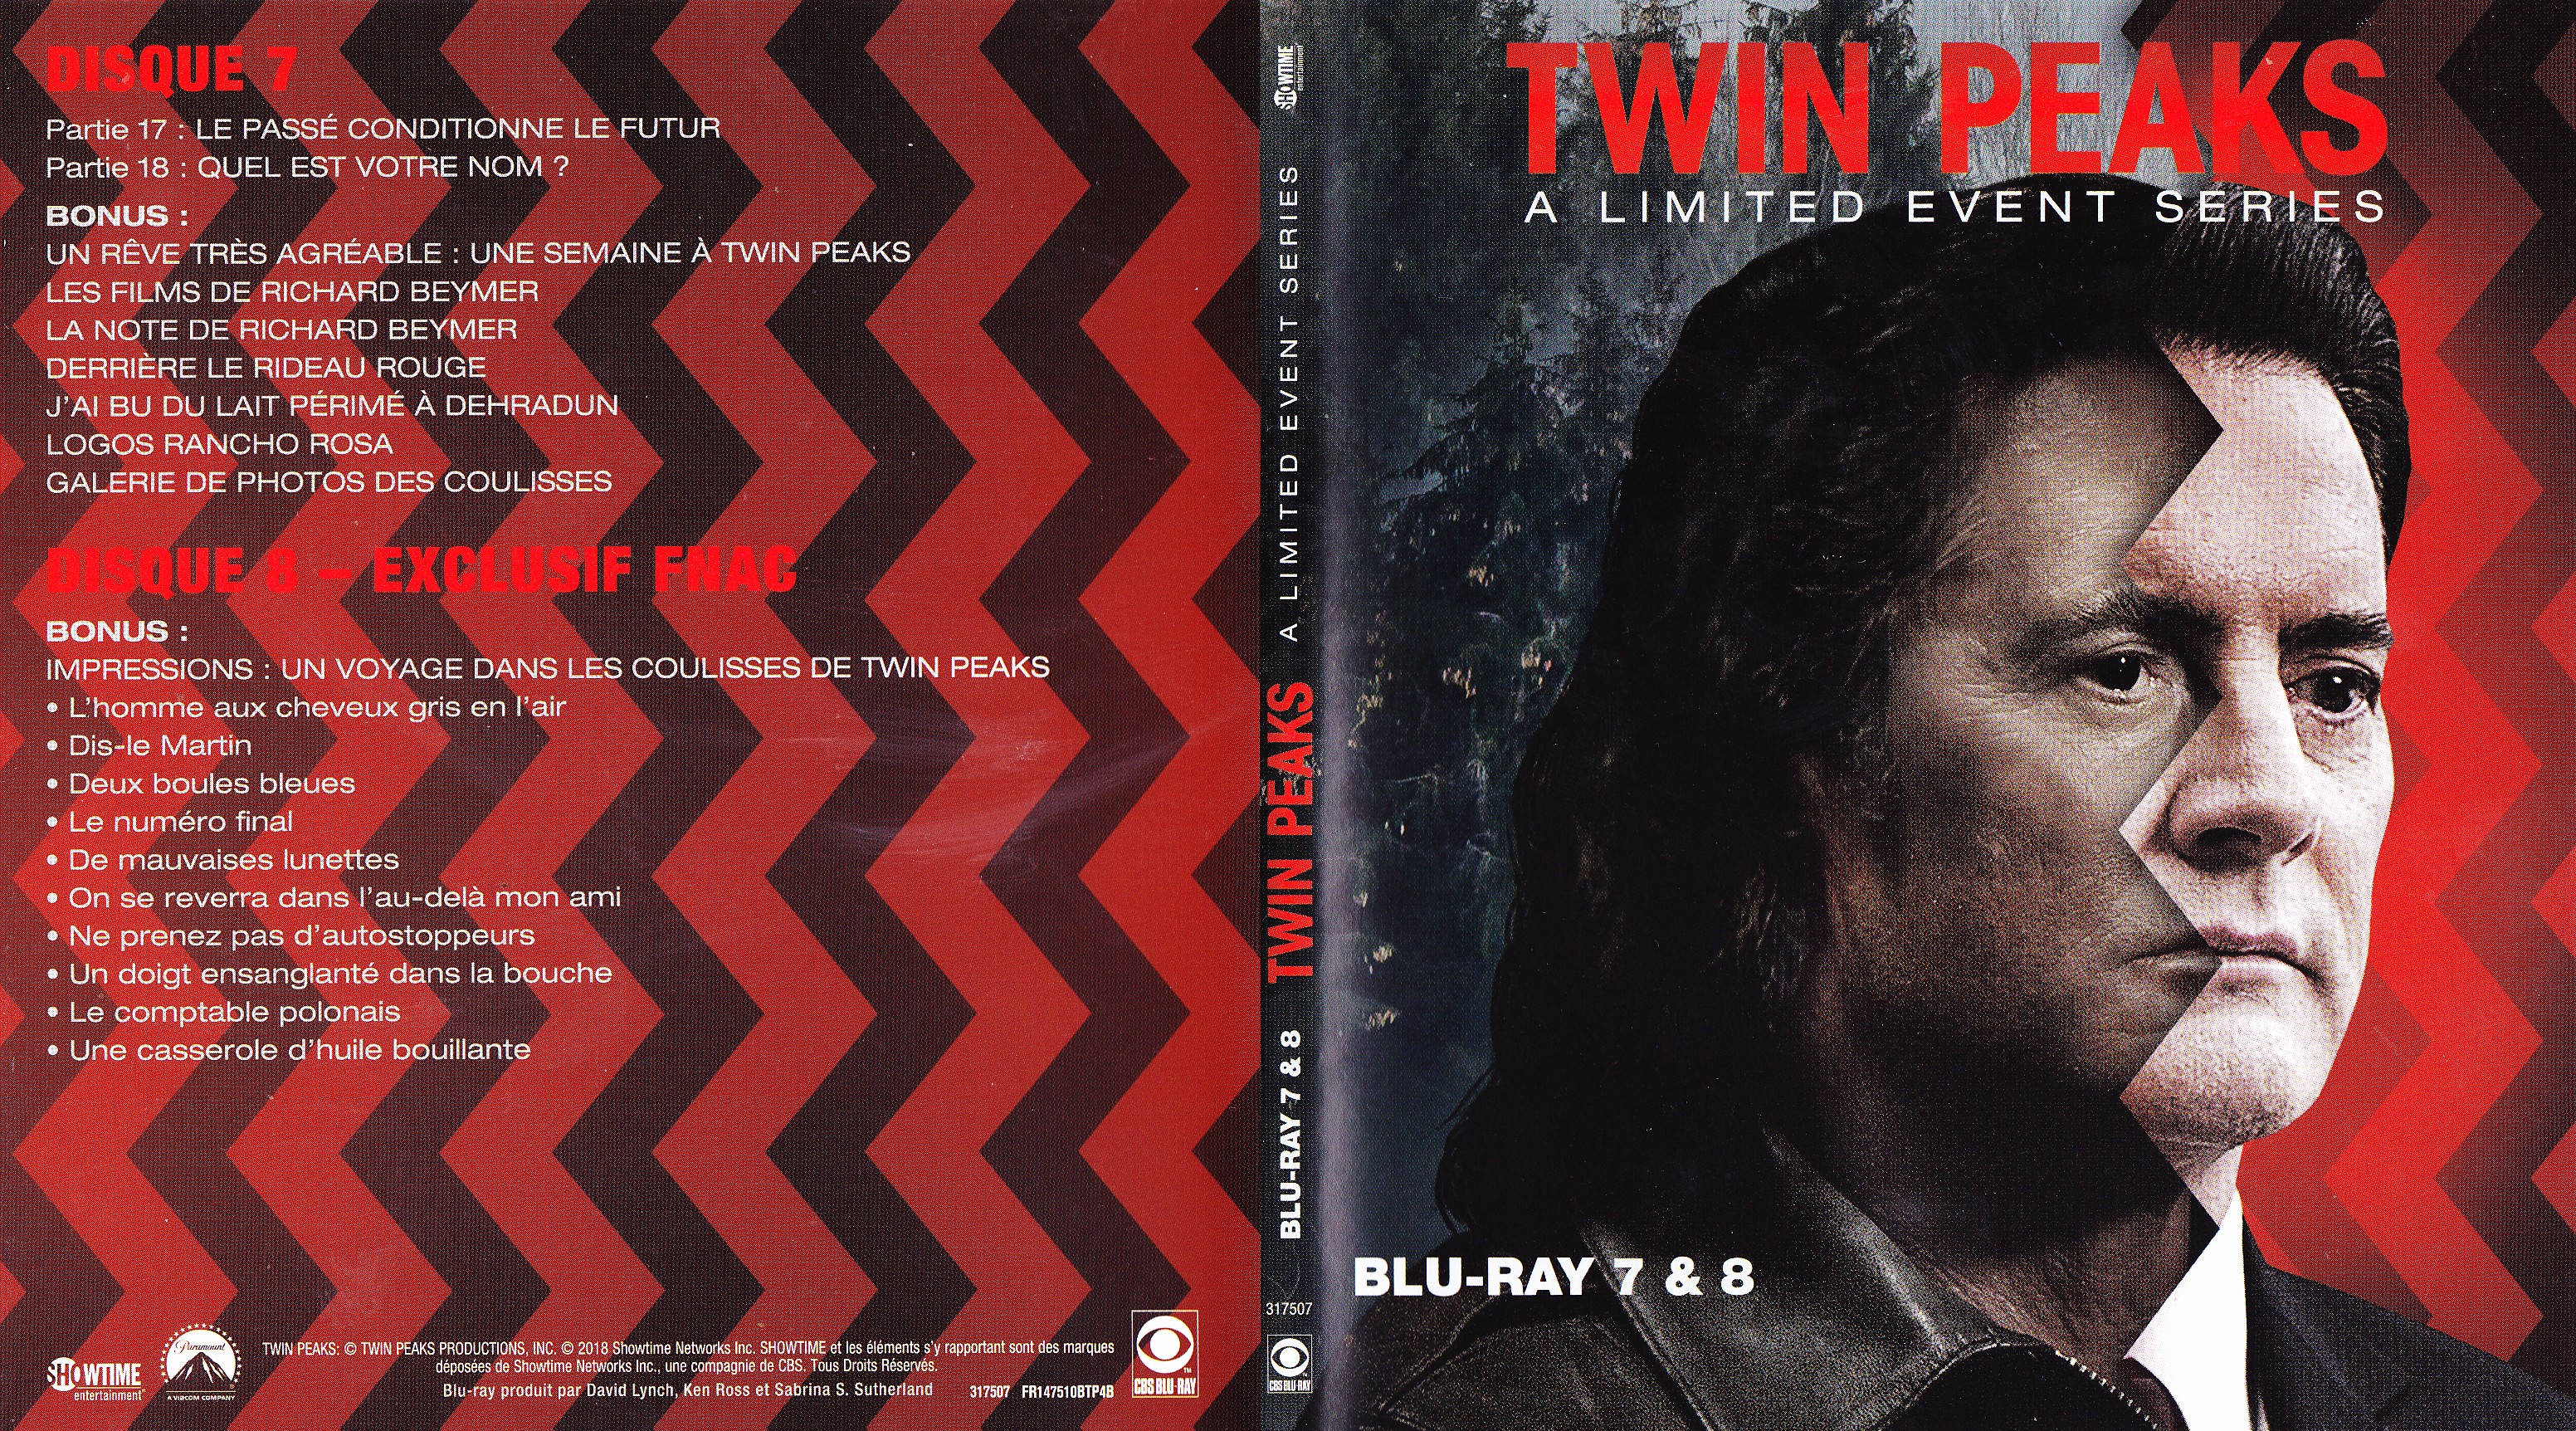 Jaquette DVD Twin Peaks A limited event series (BLU-RAY) v4